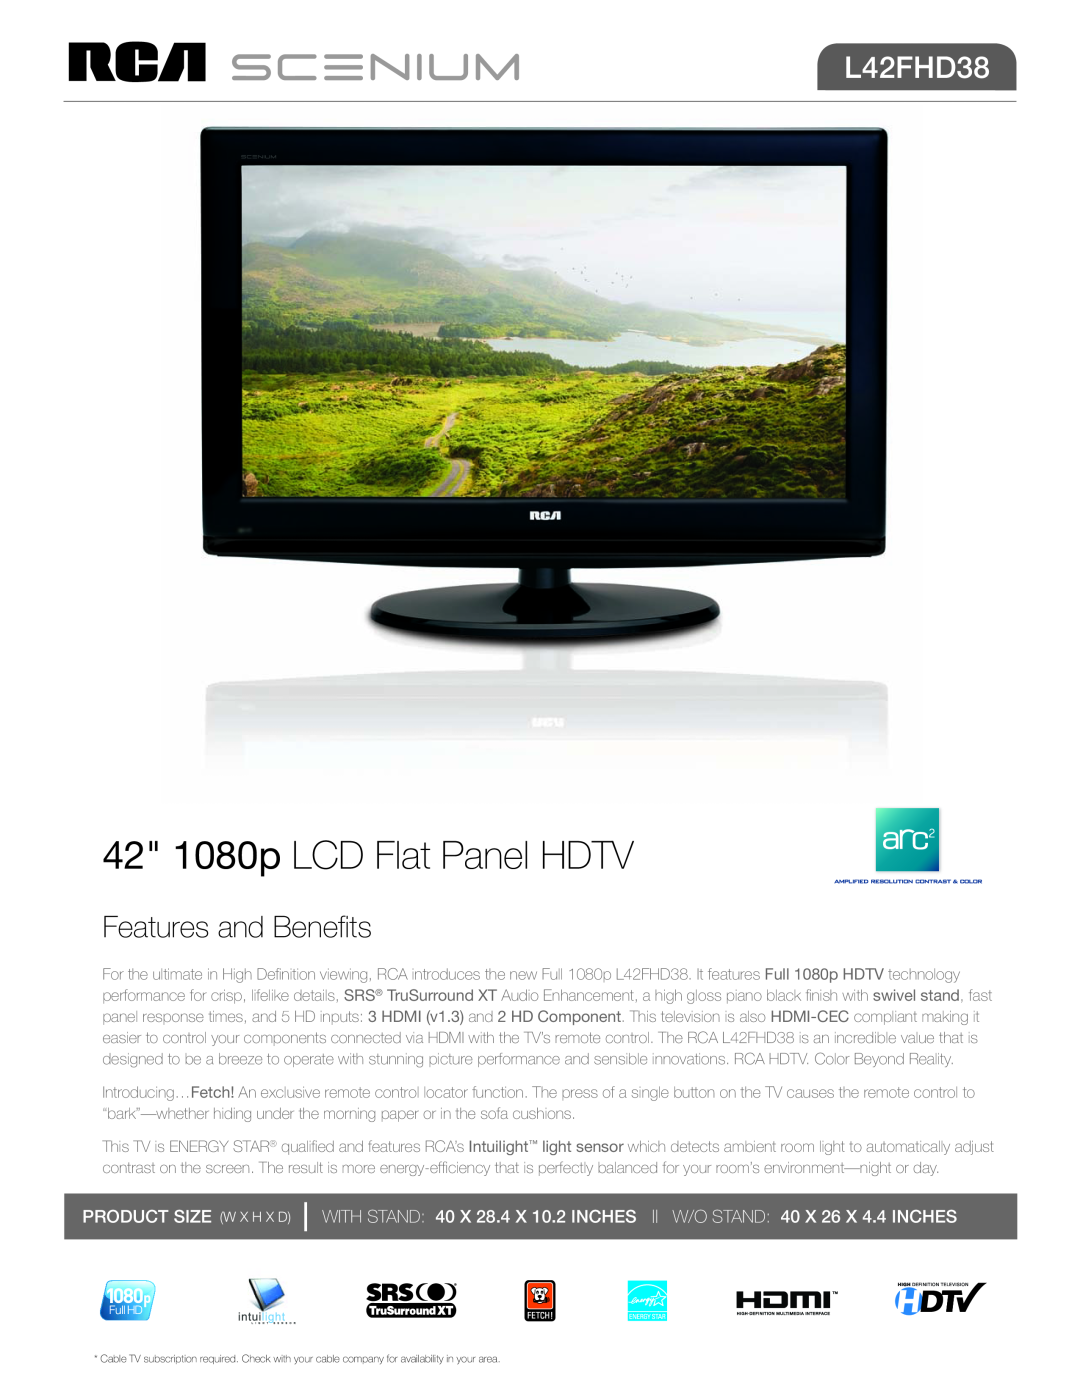 RCA L42FHD38 manual 42 1080p LCD Flat Panel HDTV, Features and Benefits, Product Size W x H x D 